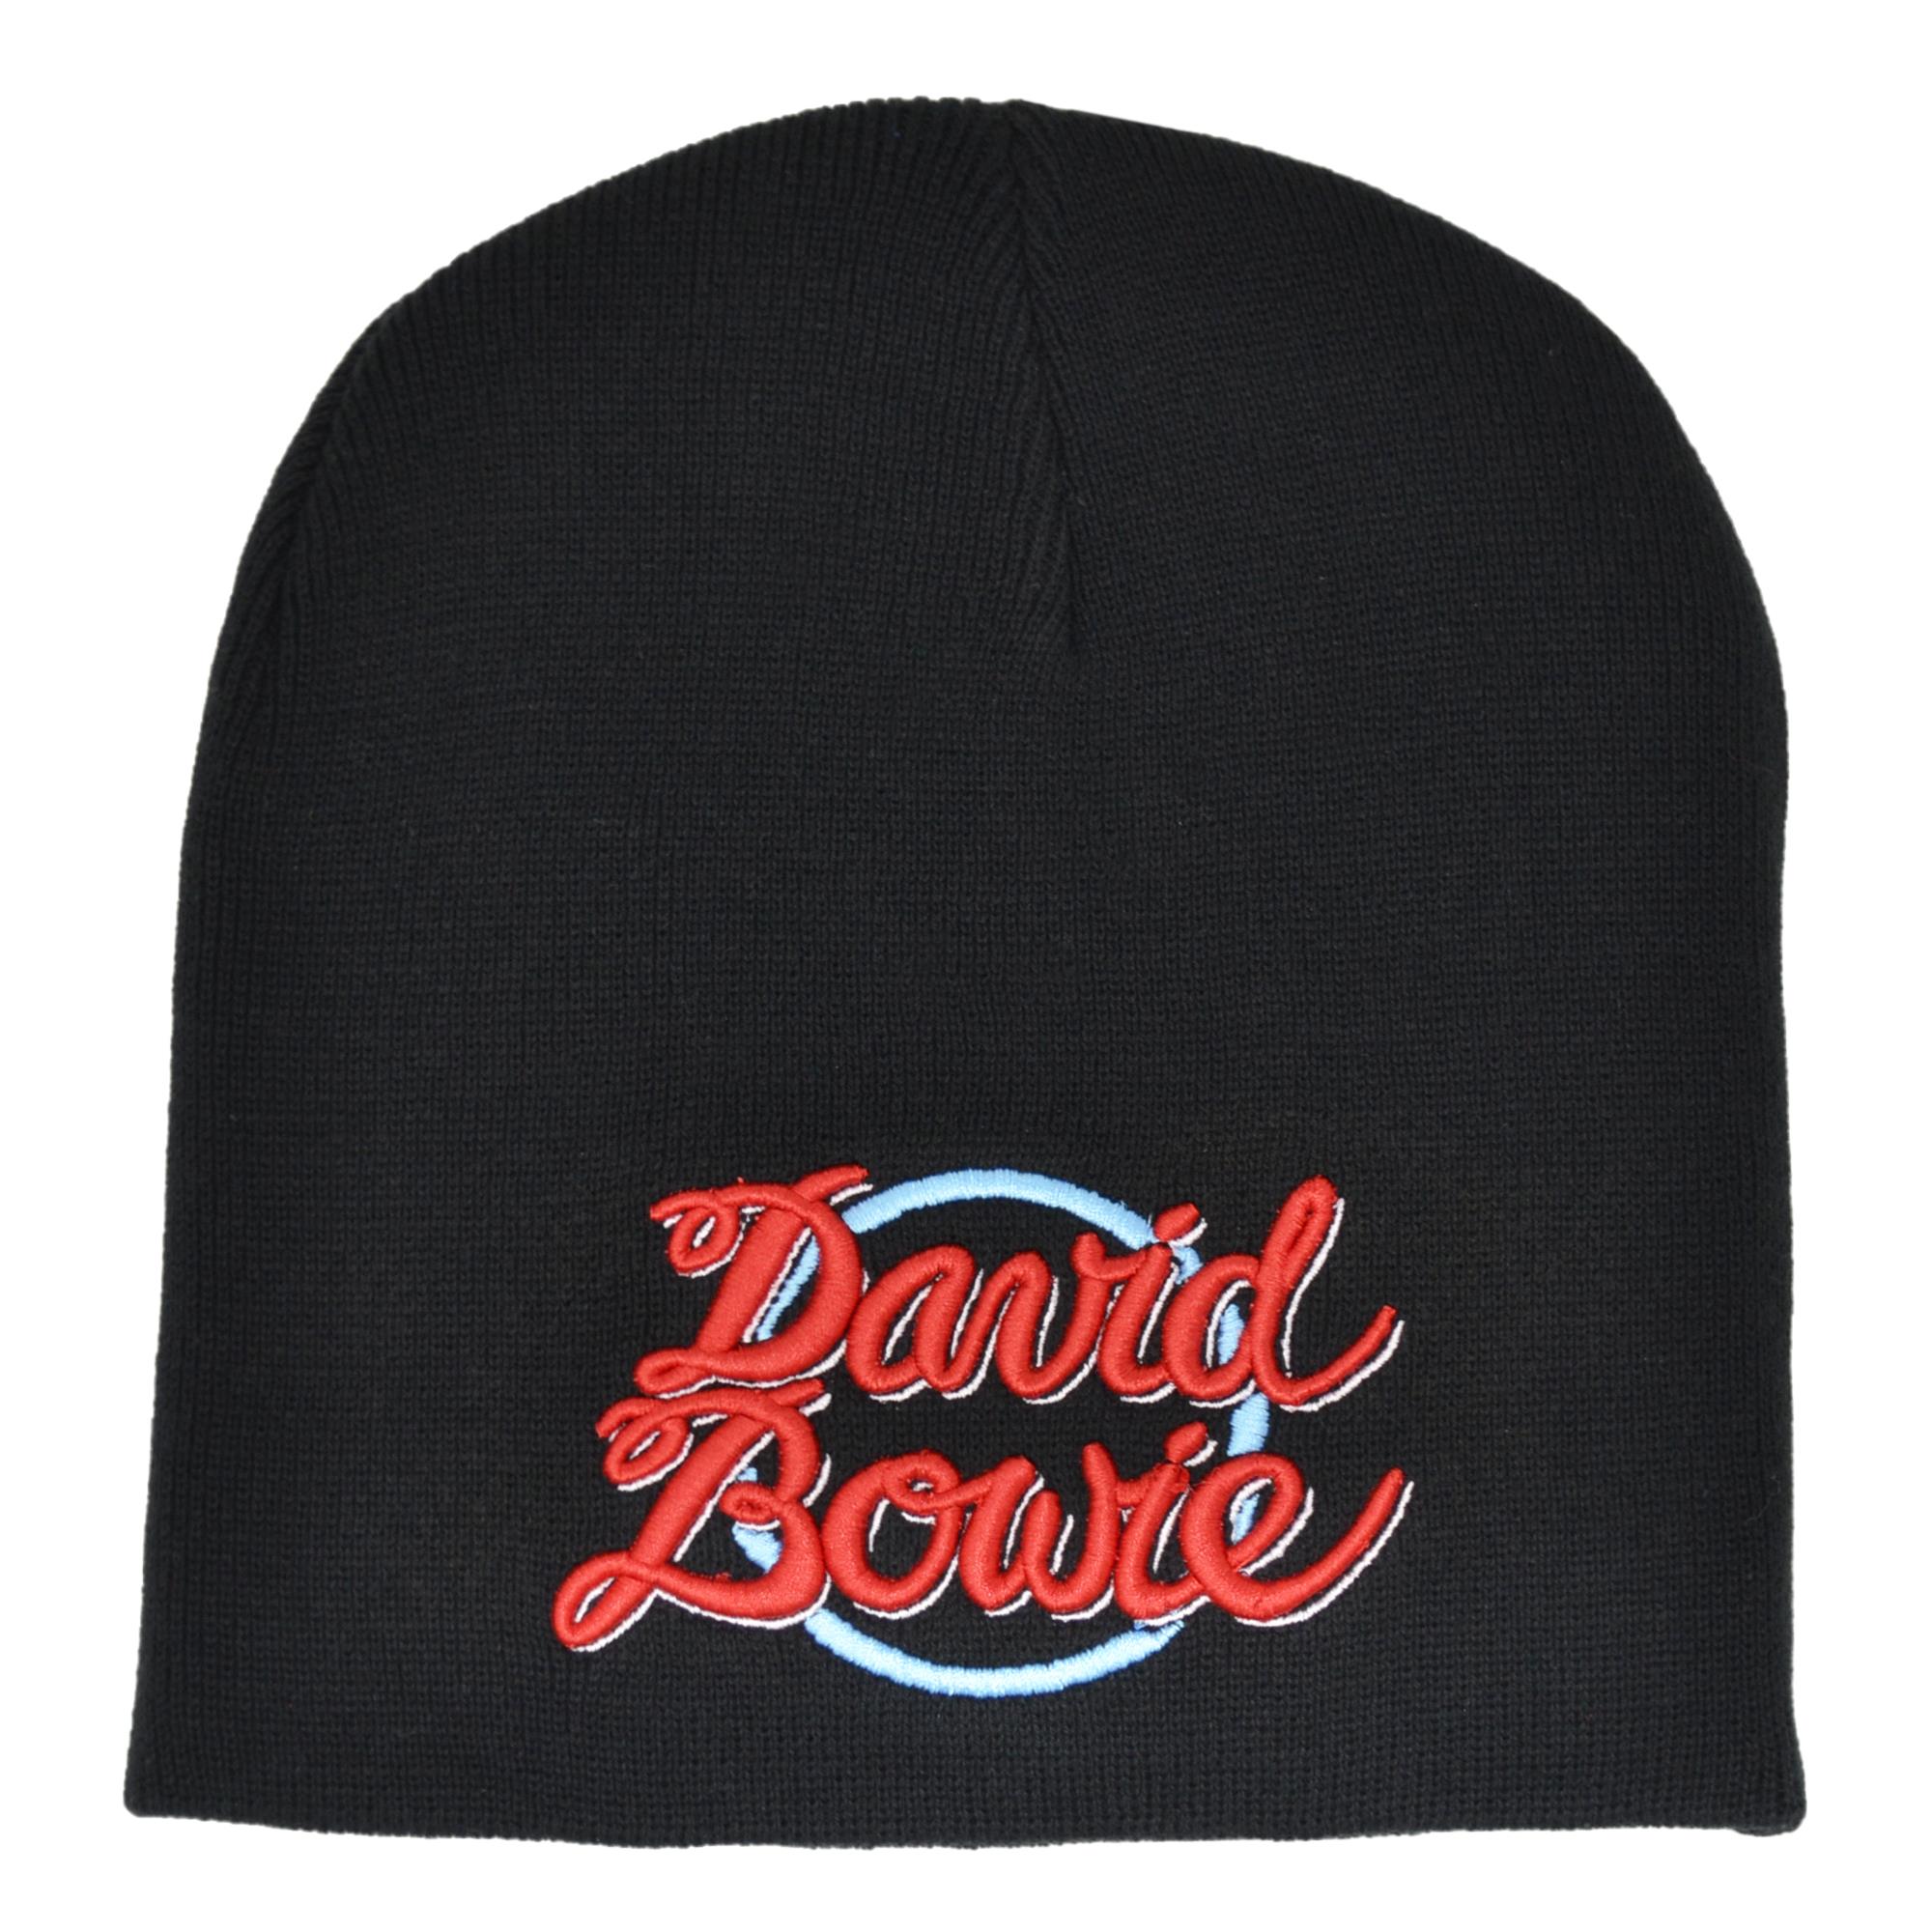 3D embroidered Logo Beanie